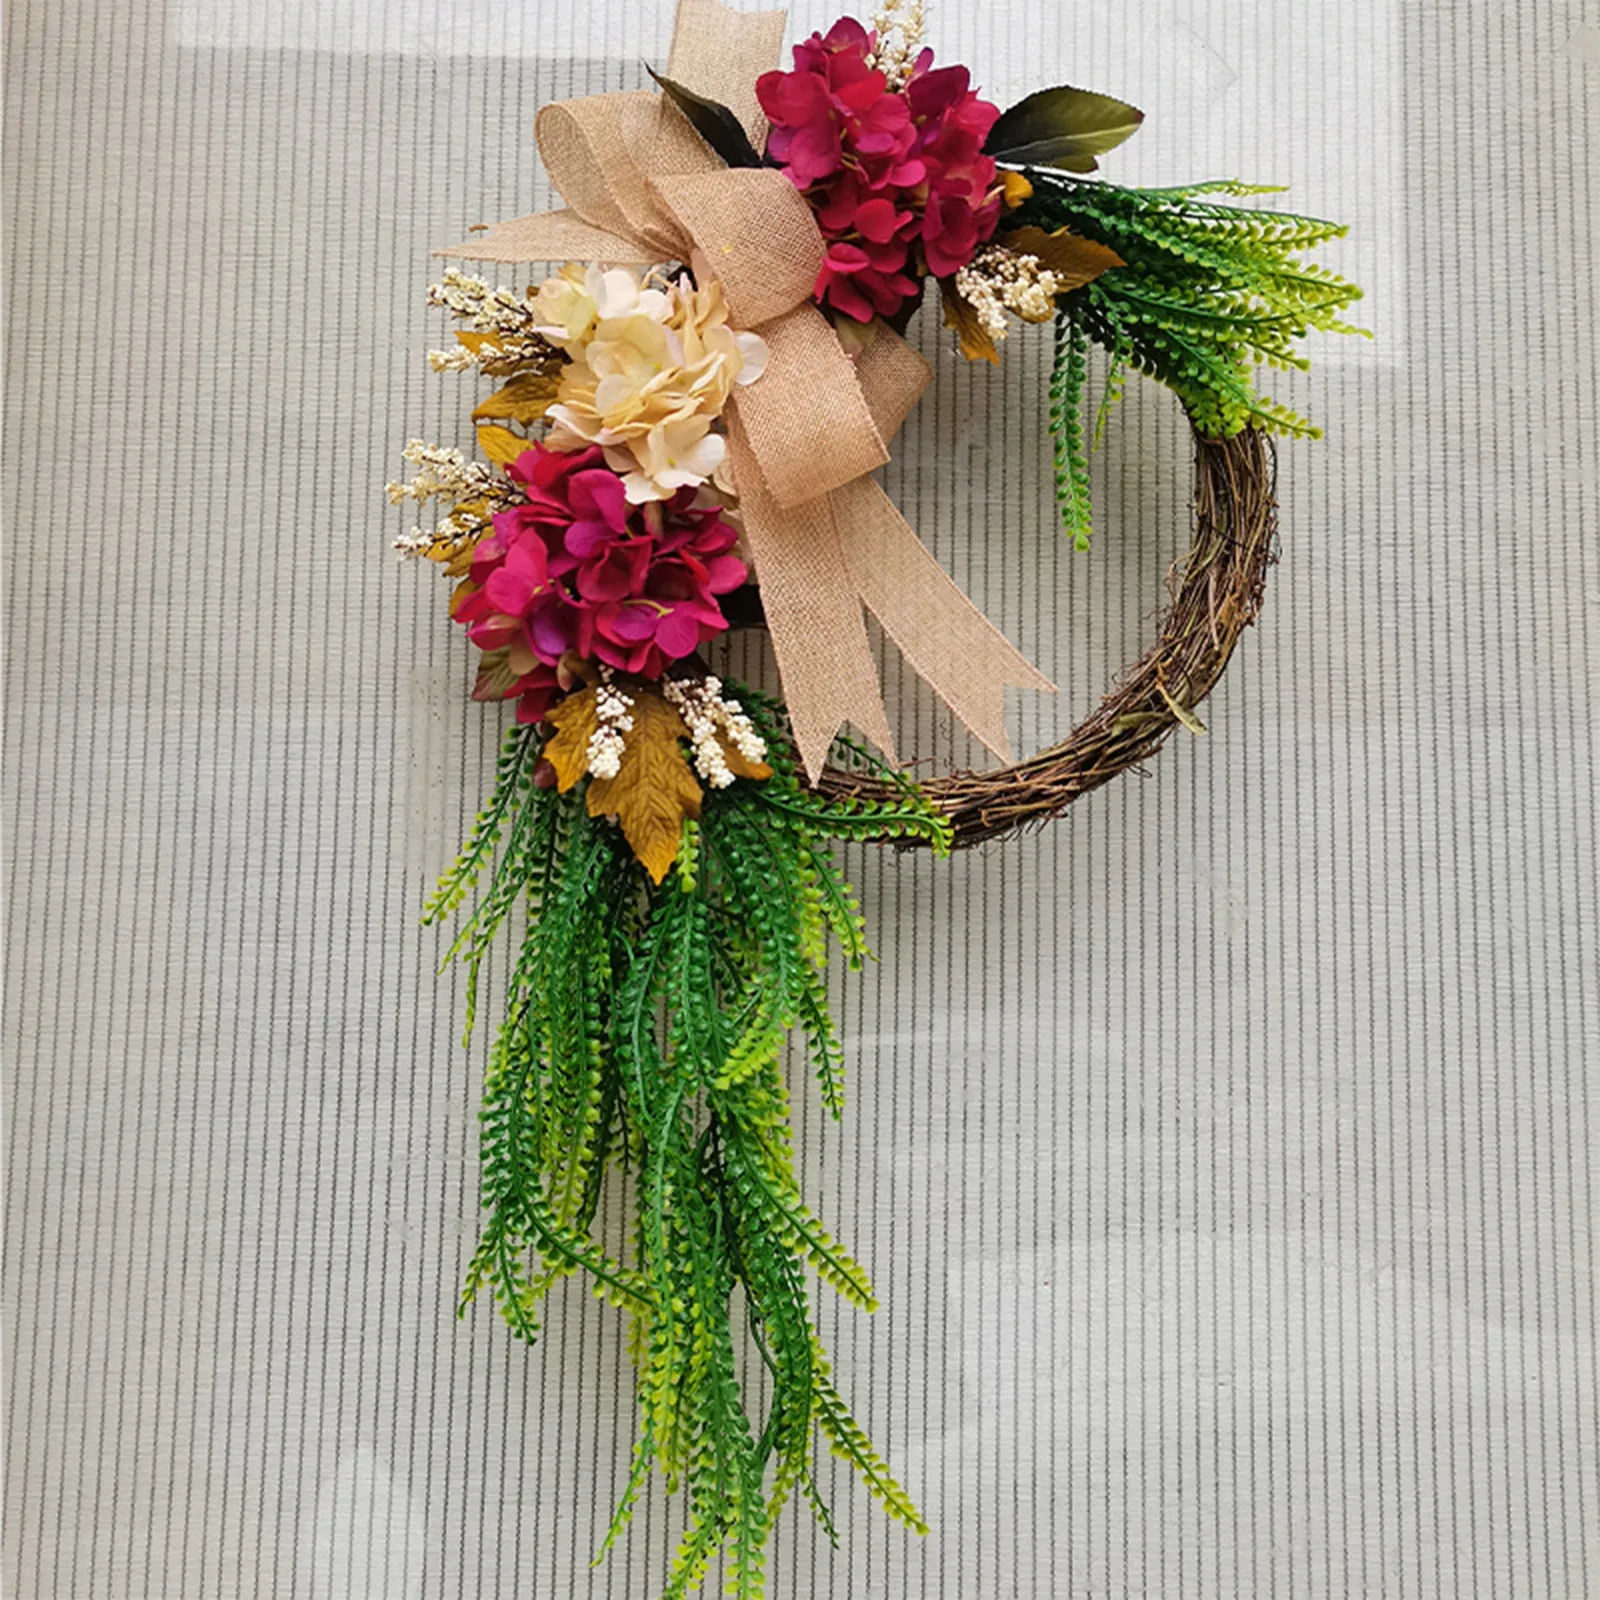 

Wreath Faux Party Wreath Dried Vines And Artificial Flowers Spring/Summer Decorative Wreath Front Door Or Interior Wall